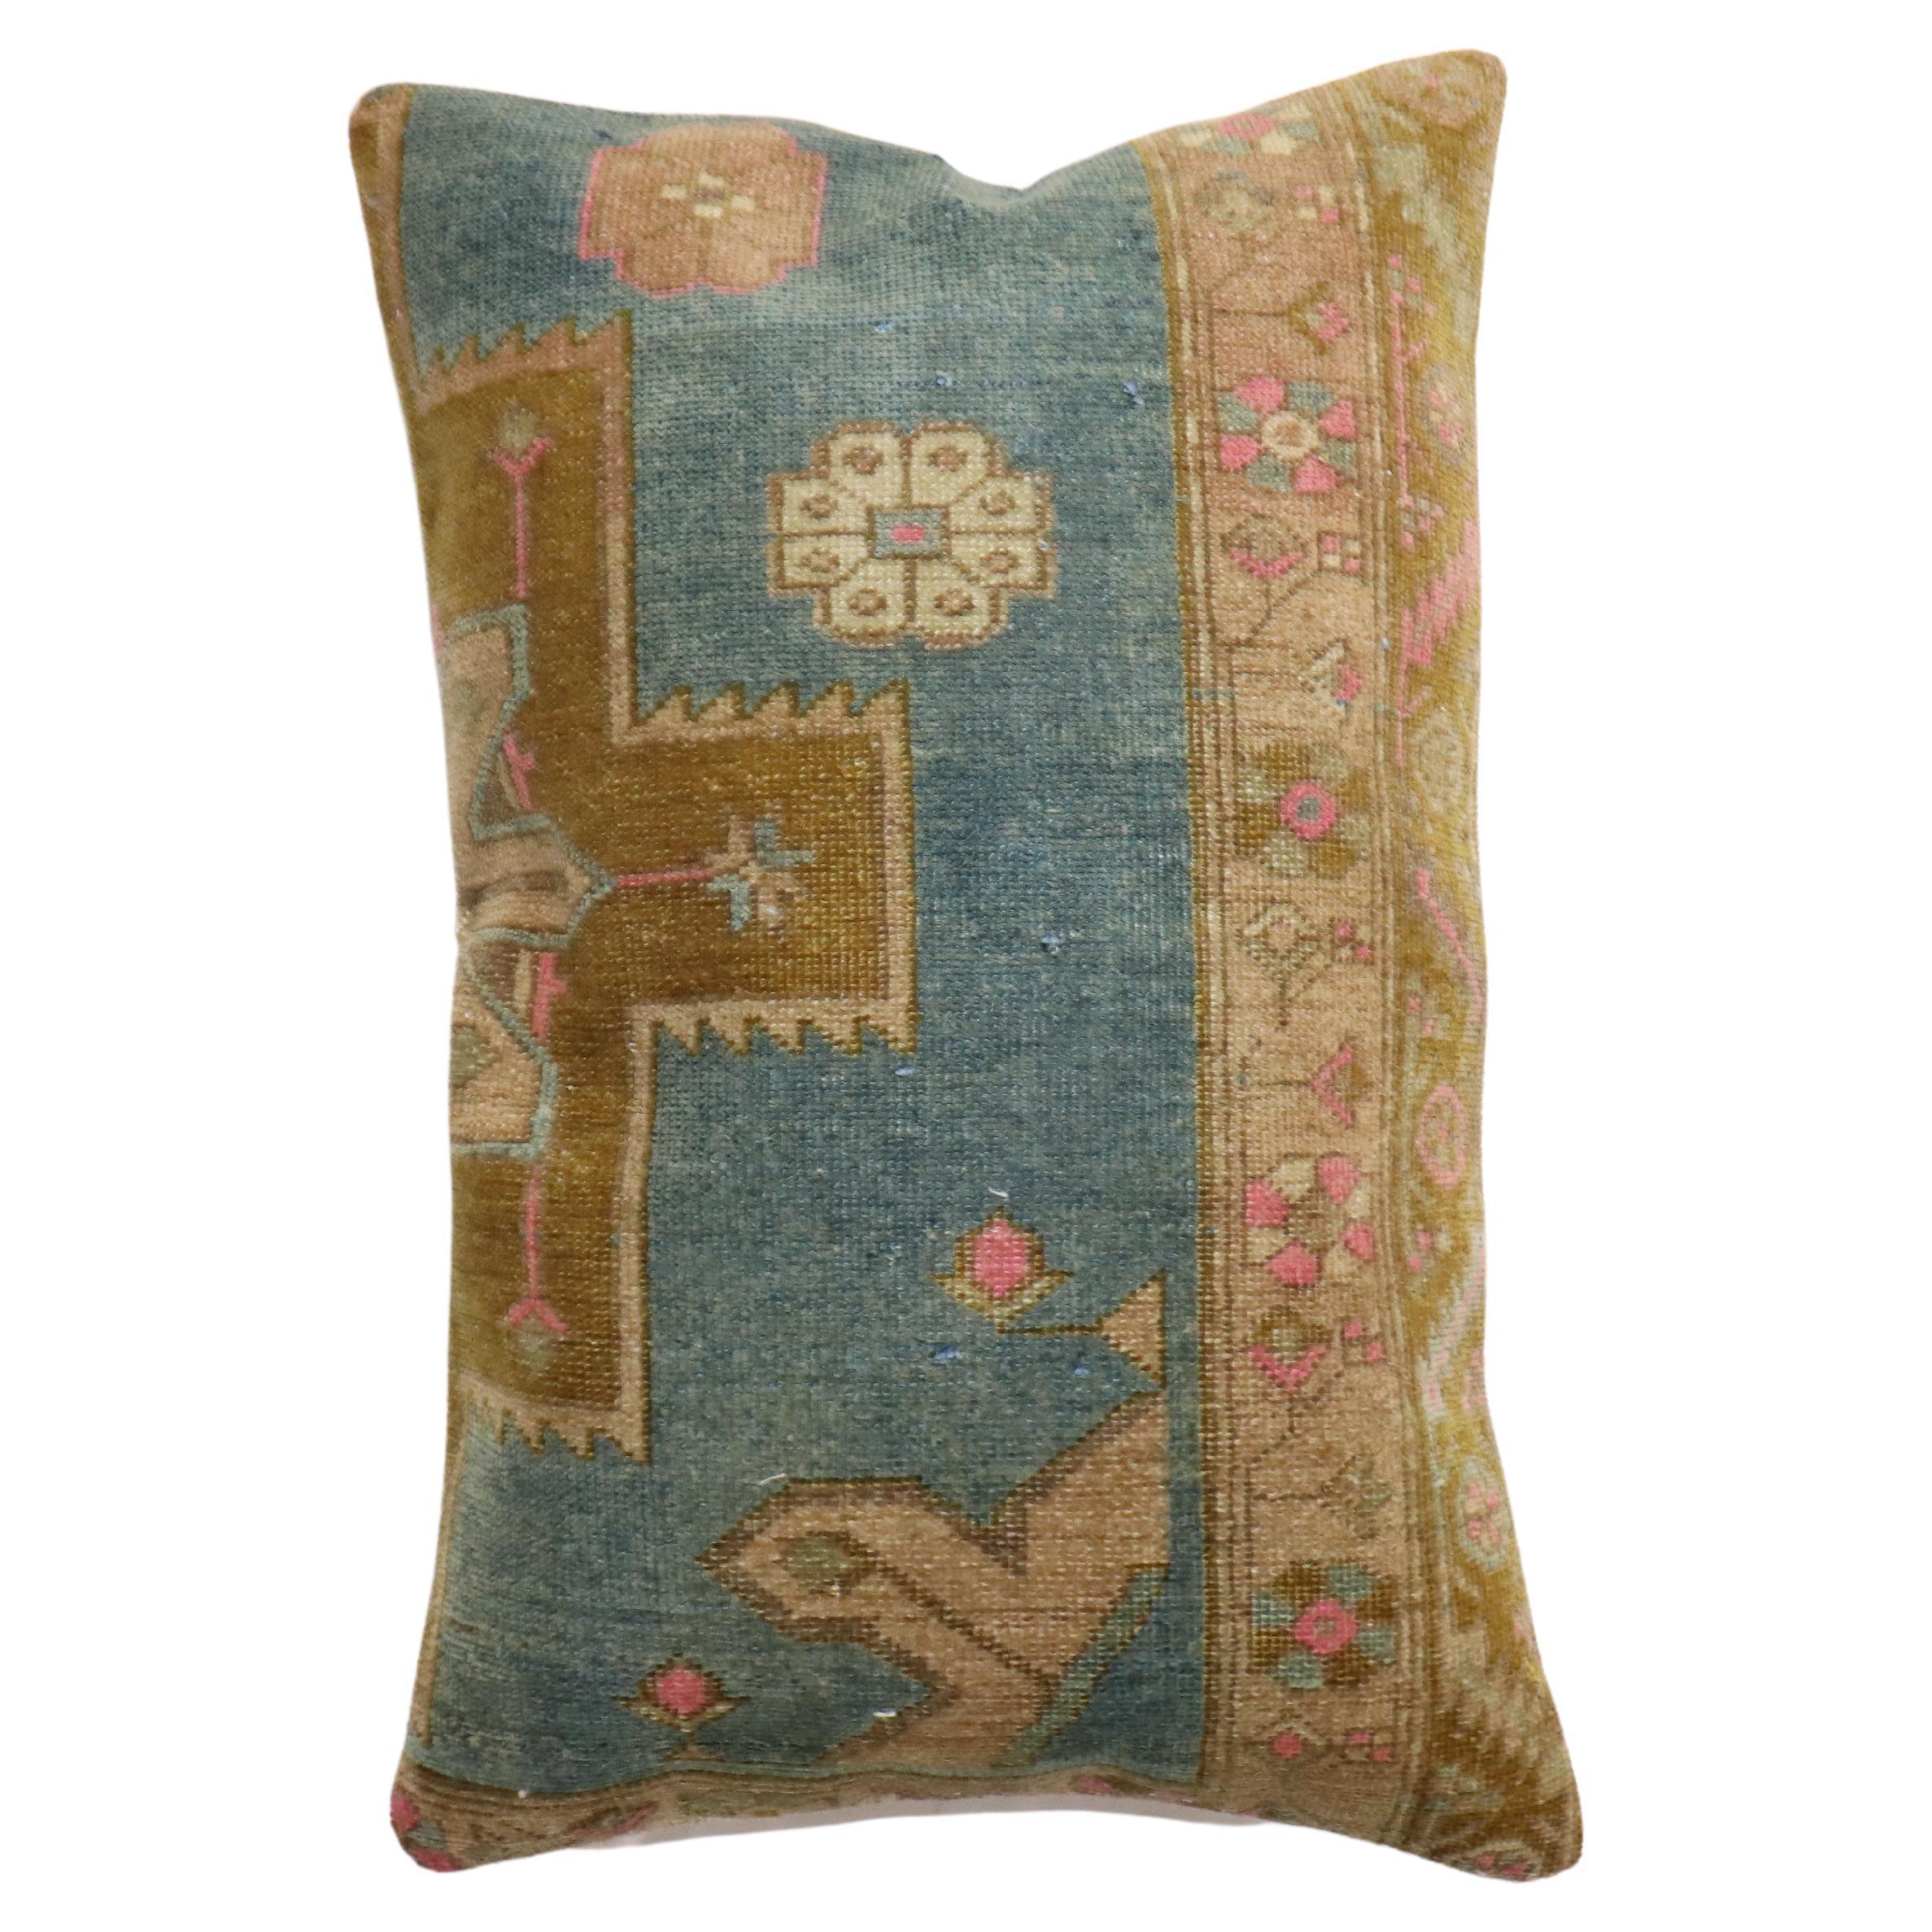 Large Pillow made from a Caucasian Karabagh rug. Polyfill and zipper closure included

Measures: 16'' x 24''.